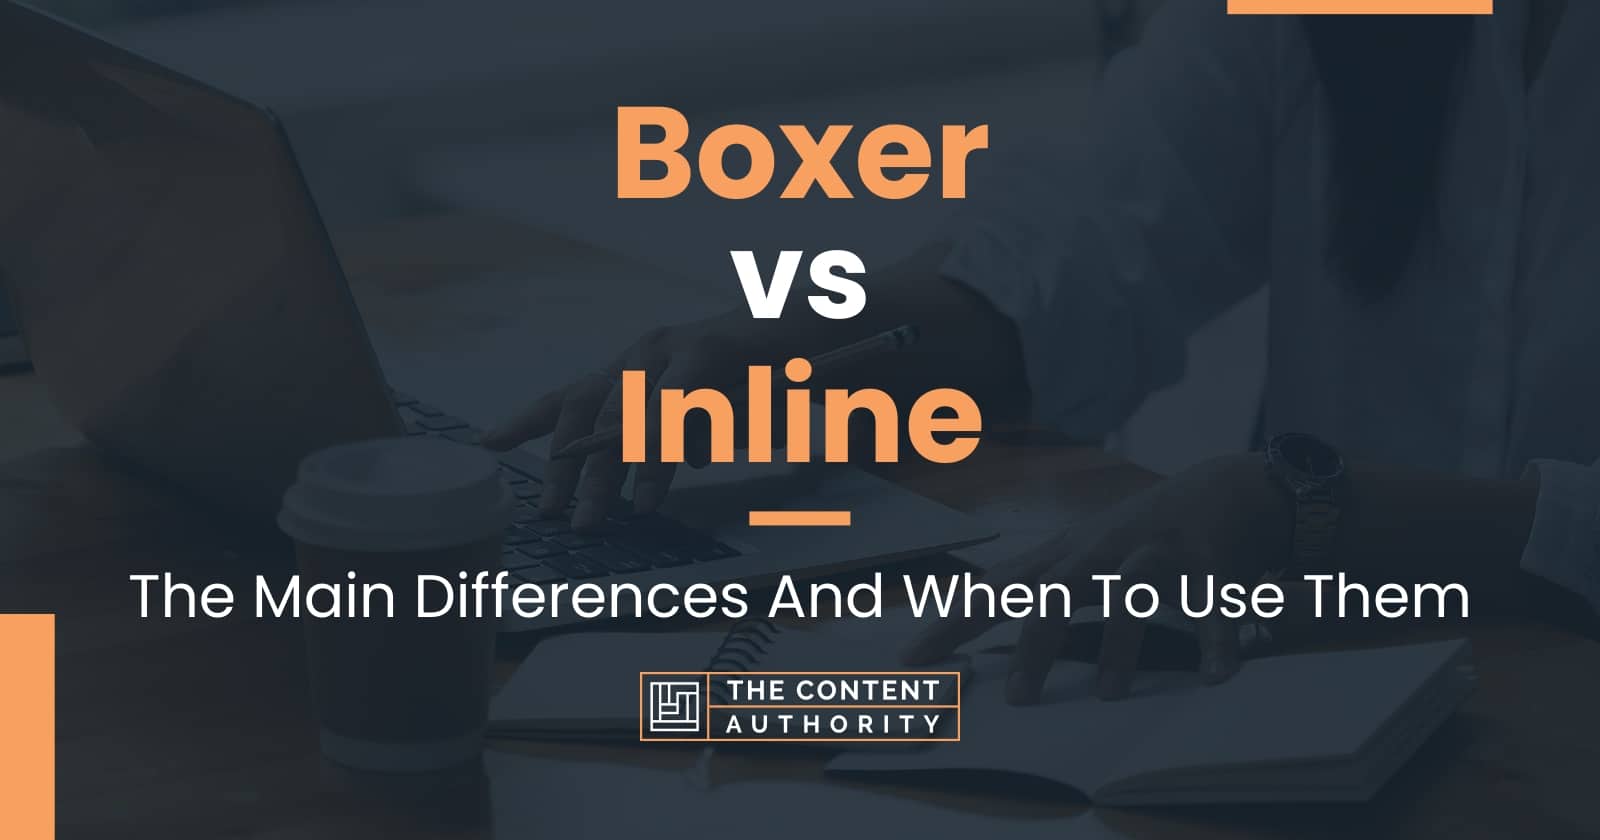 Boxer vs Inline: The Main Differences And When To Use Them